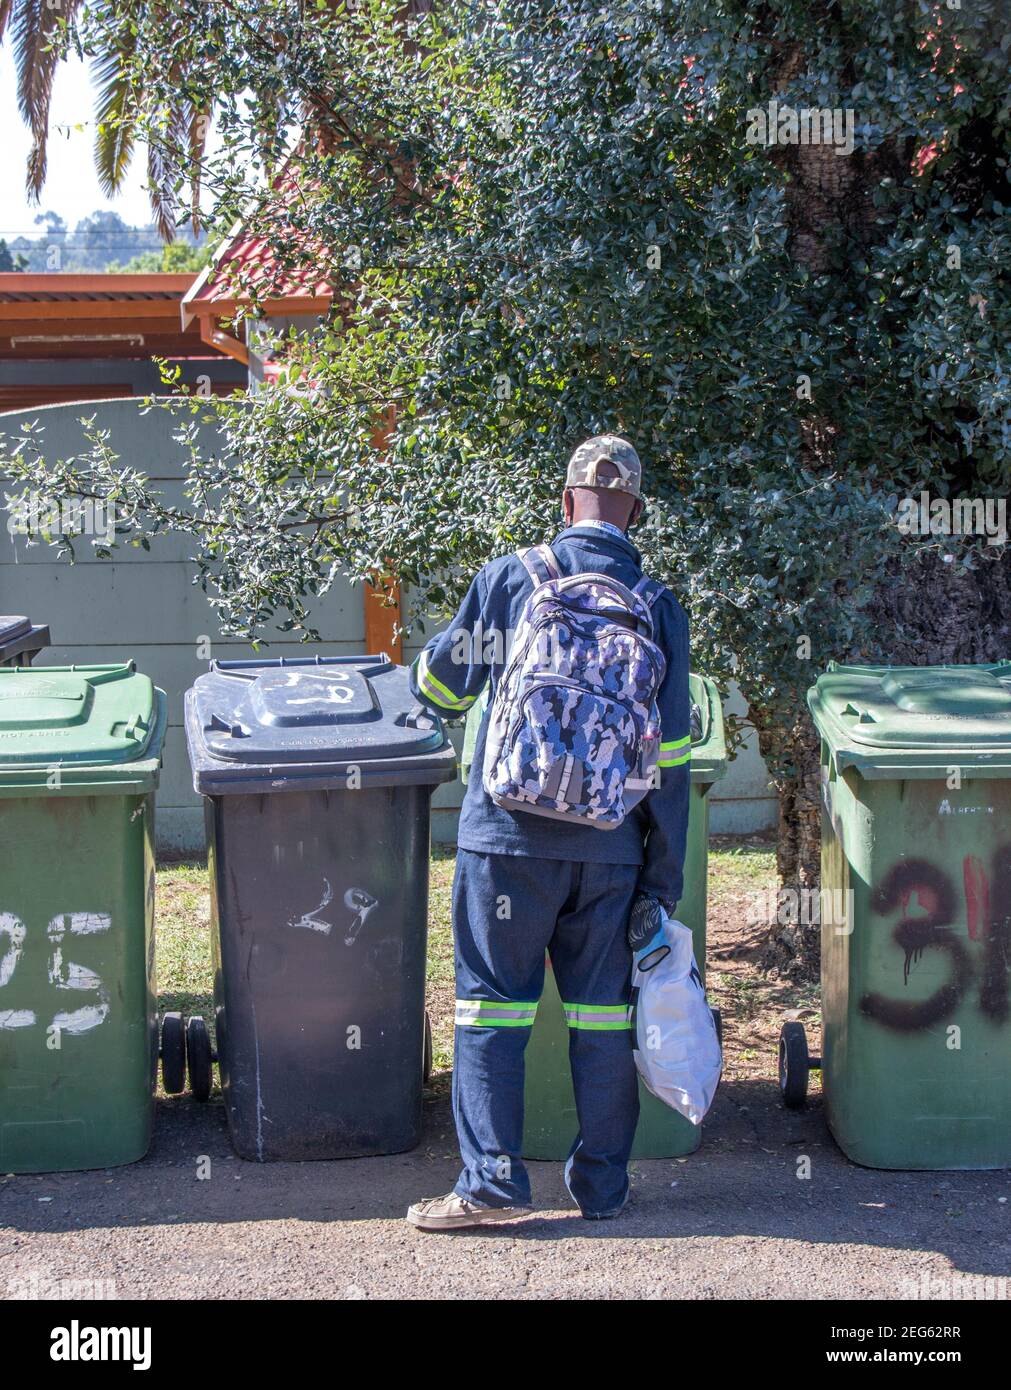 Johannesburg, South Africa - unidentified black man digs in residential refuse bins standing on a street in the city Stock Photo